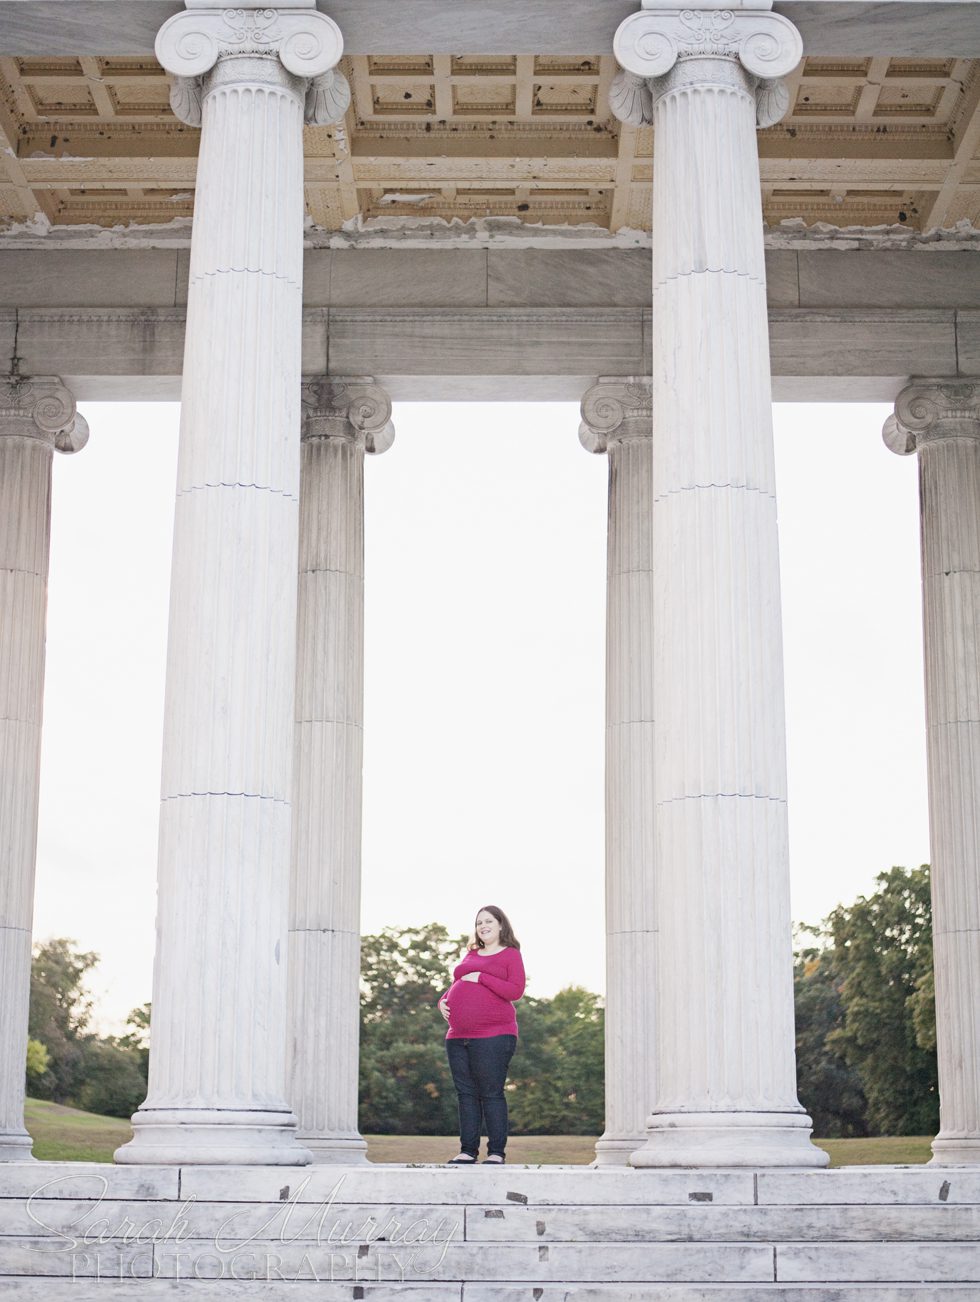 Baby Bump Session at the Roger Williams Park, Providence, Rhode Island - Sarah Murray Photography